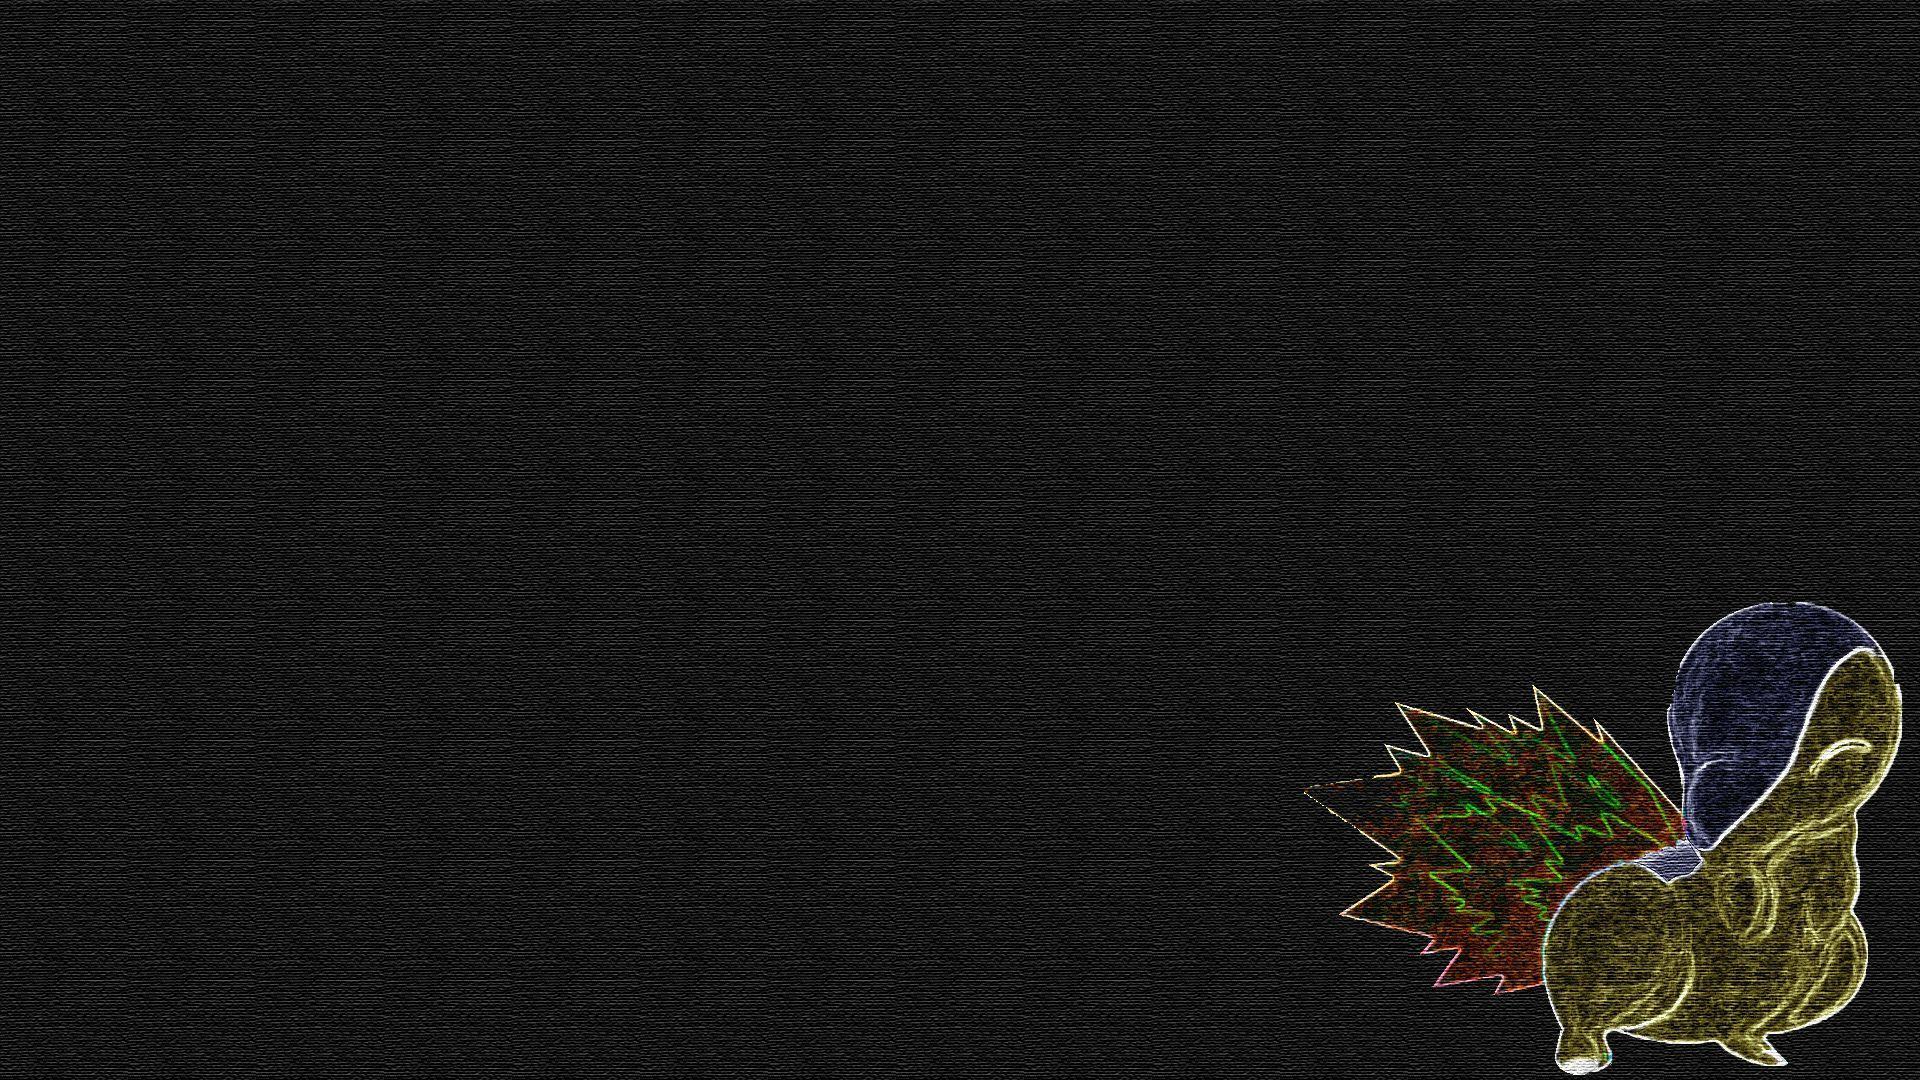 I am starting to use photohop and made this cyndaquil wallpaper